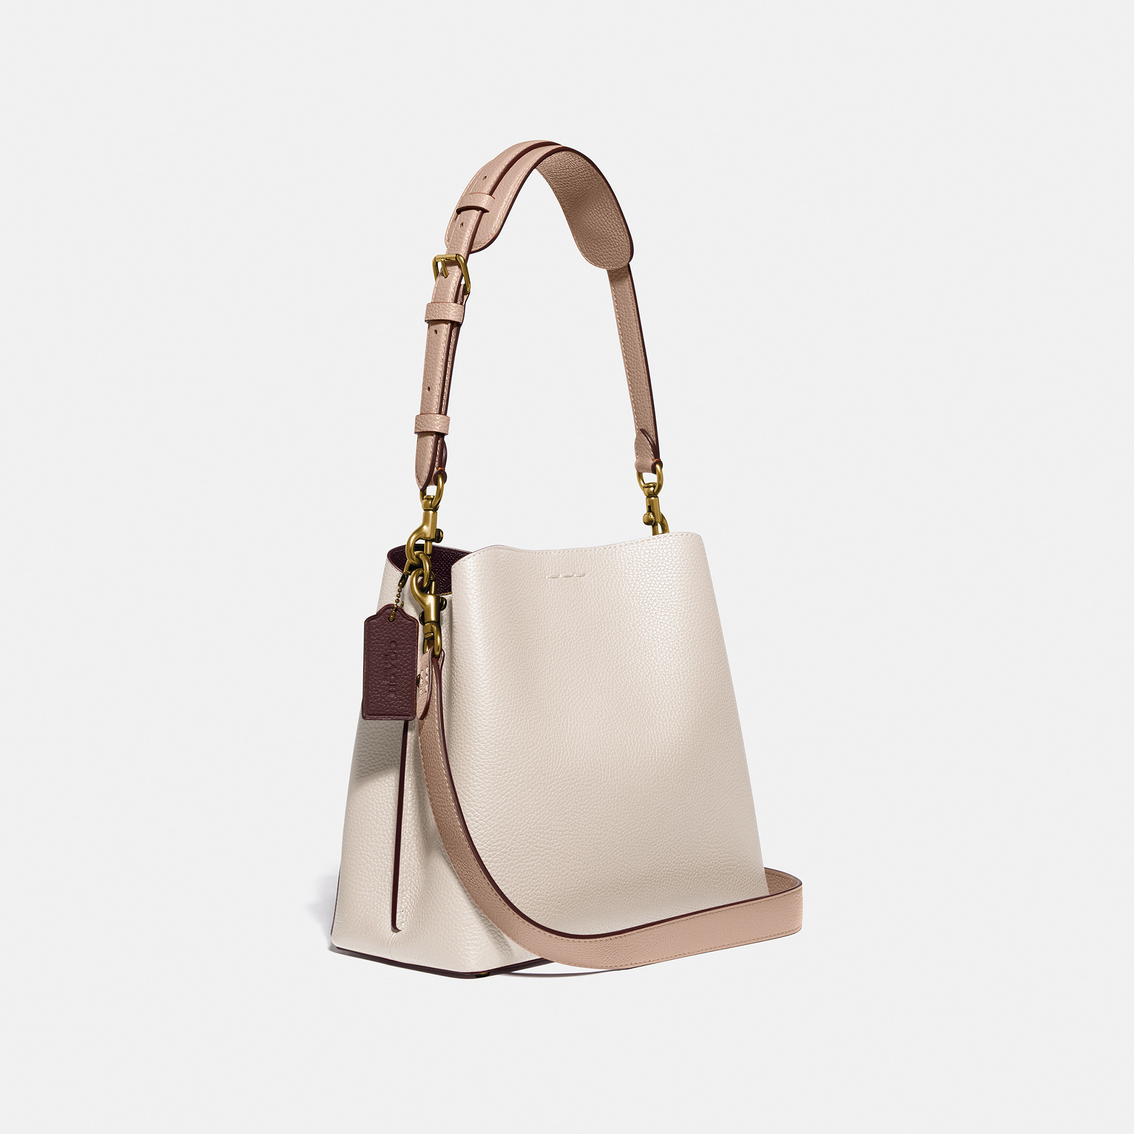 COACH Willow Bucket Bag - Image 3 of 5